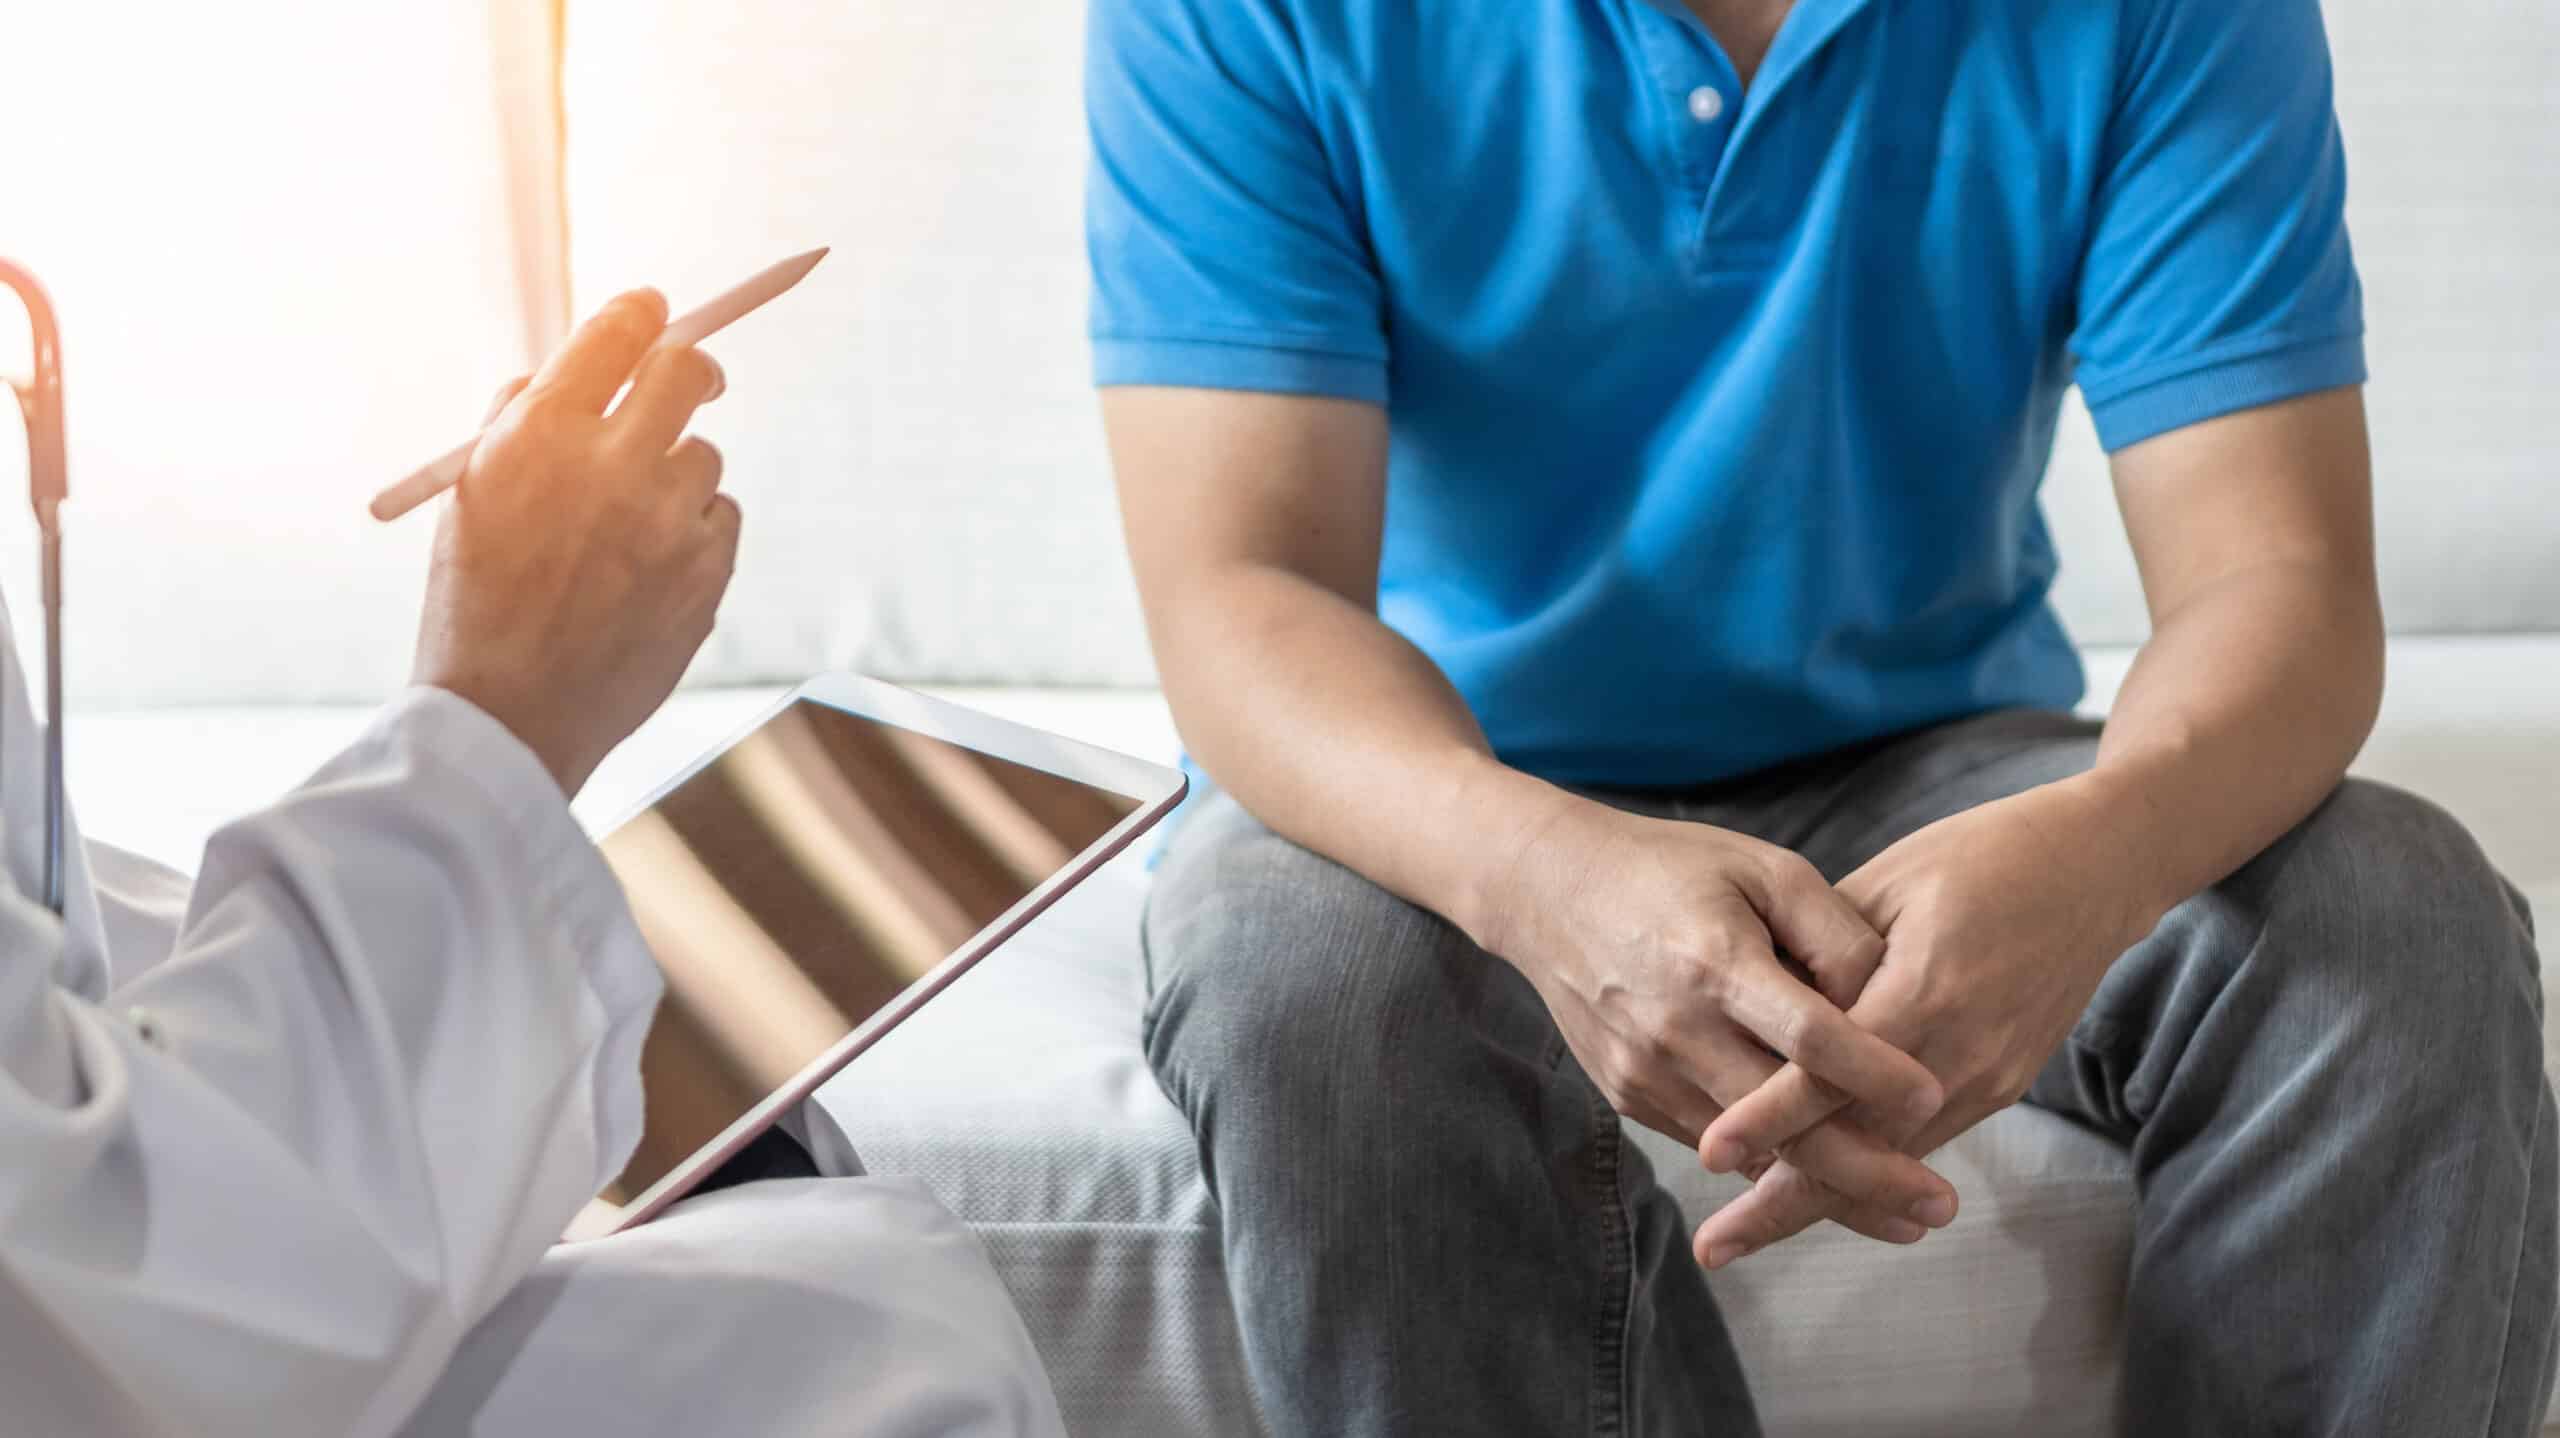 A man speaks to a doctor holding a tablet - What Is A Substance Abuse Treatment Plan